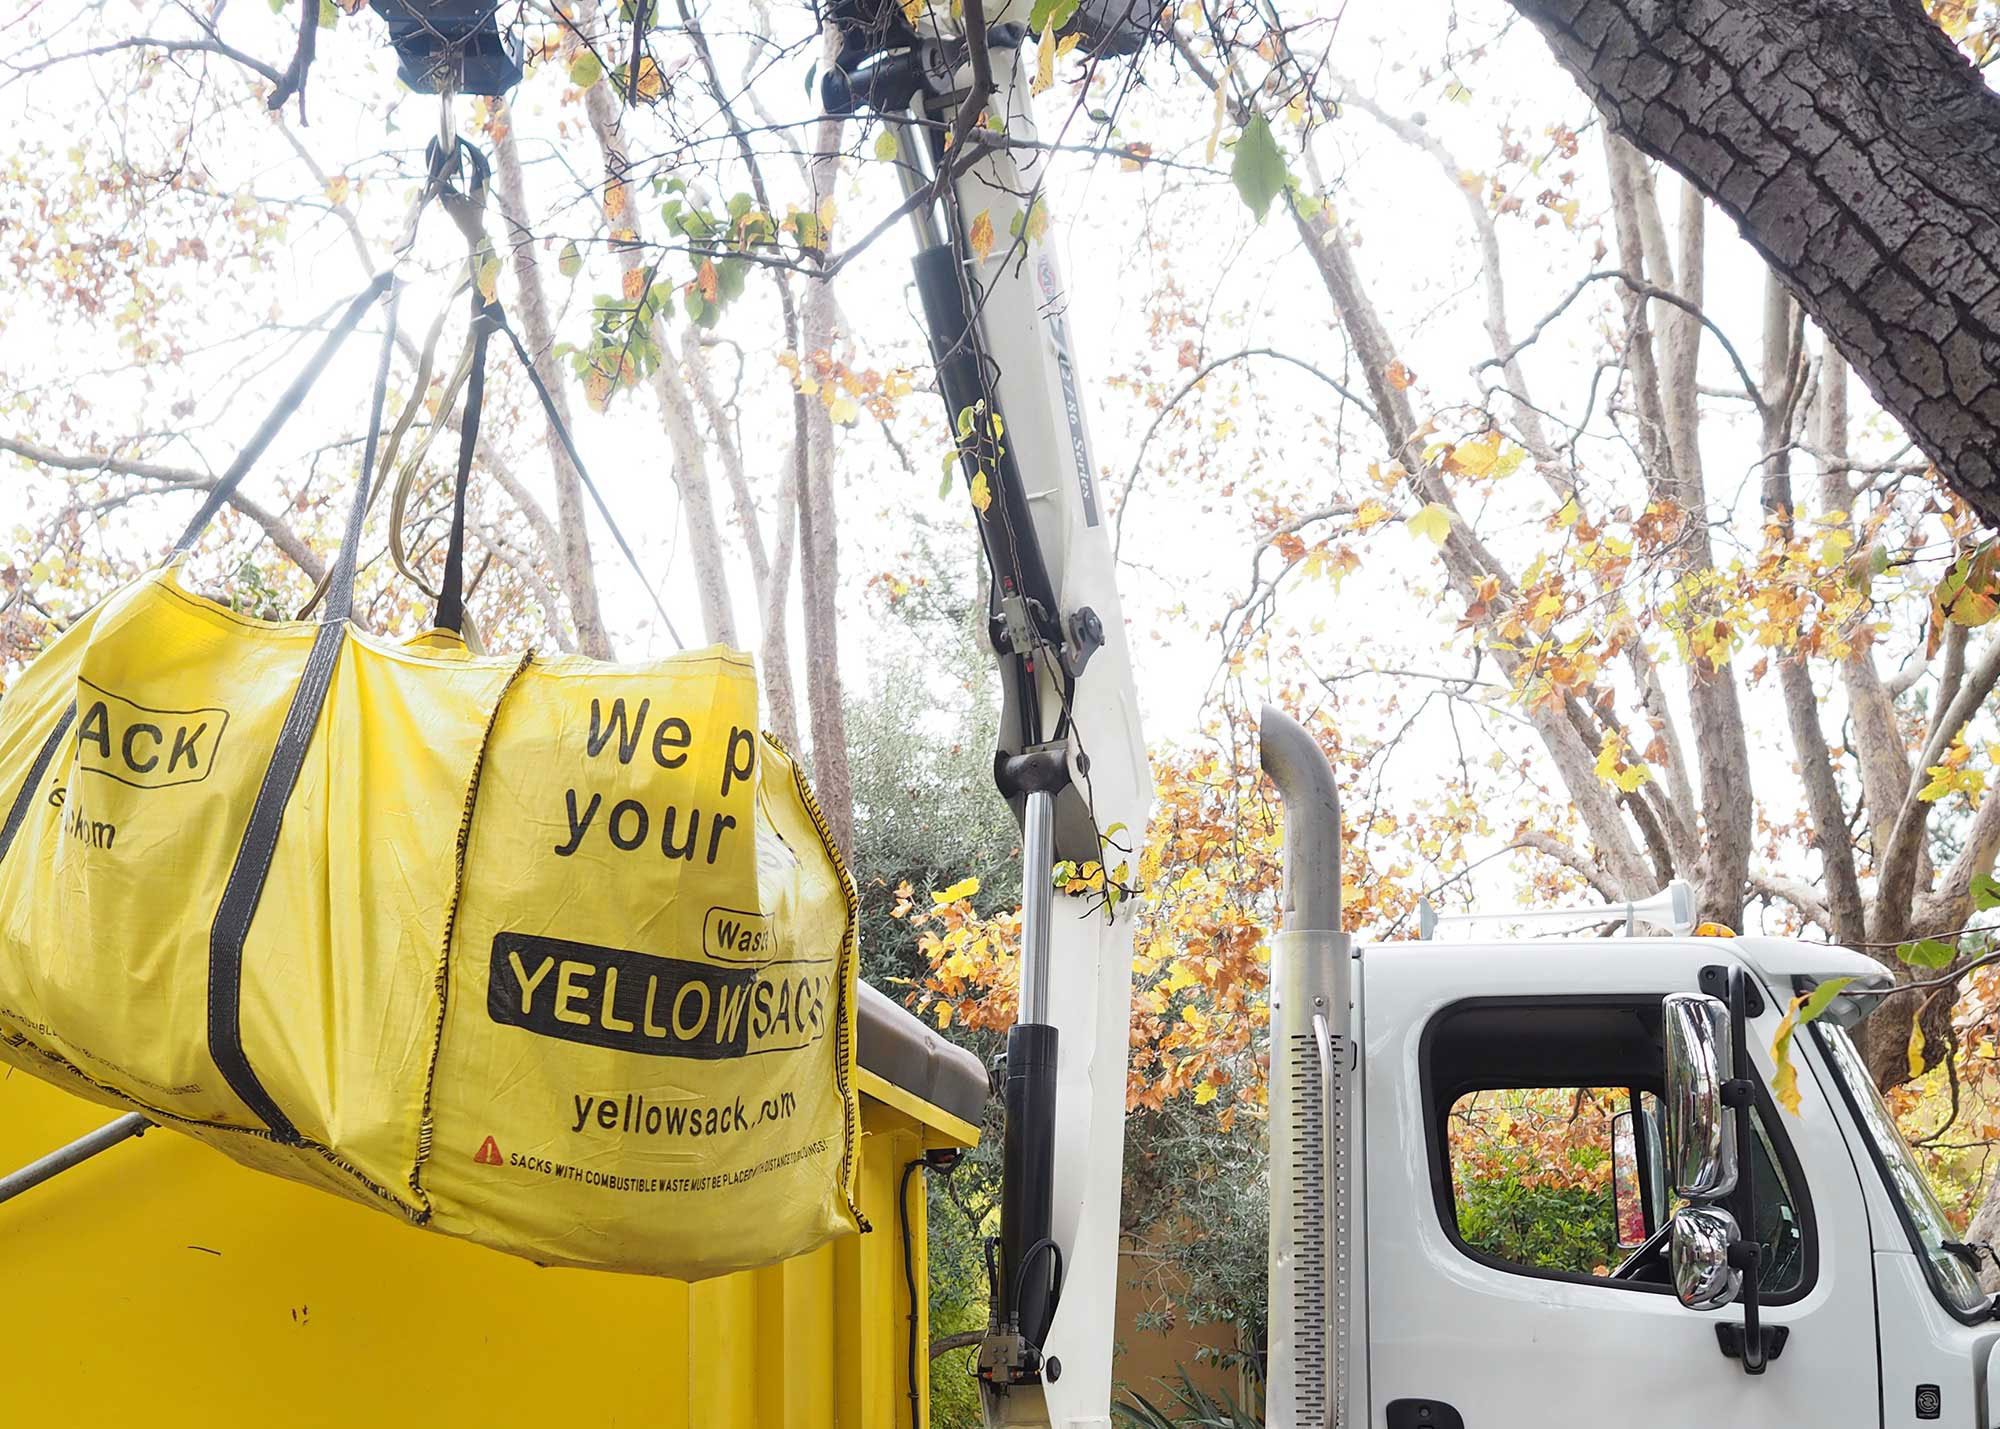 Yellowsack - Dumpster bag for easy junk removal